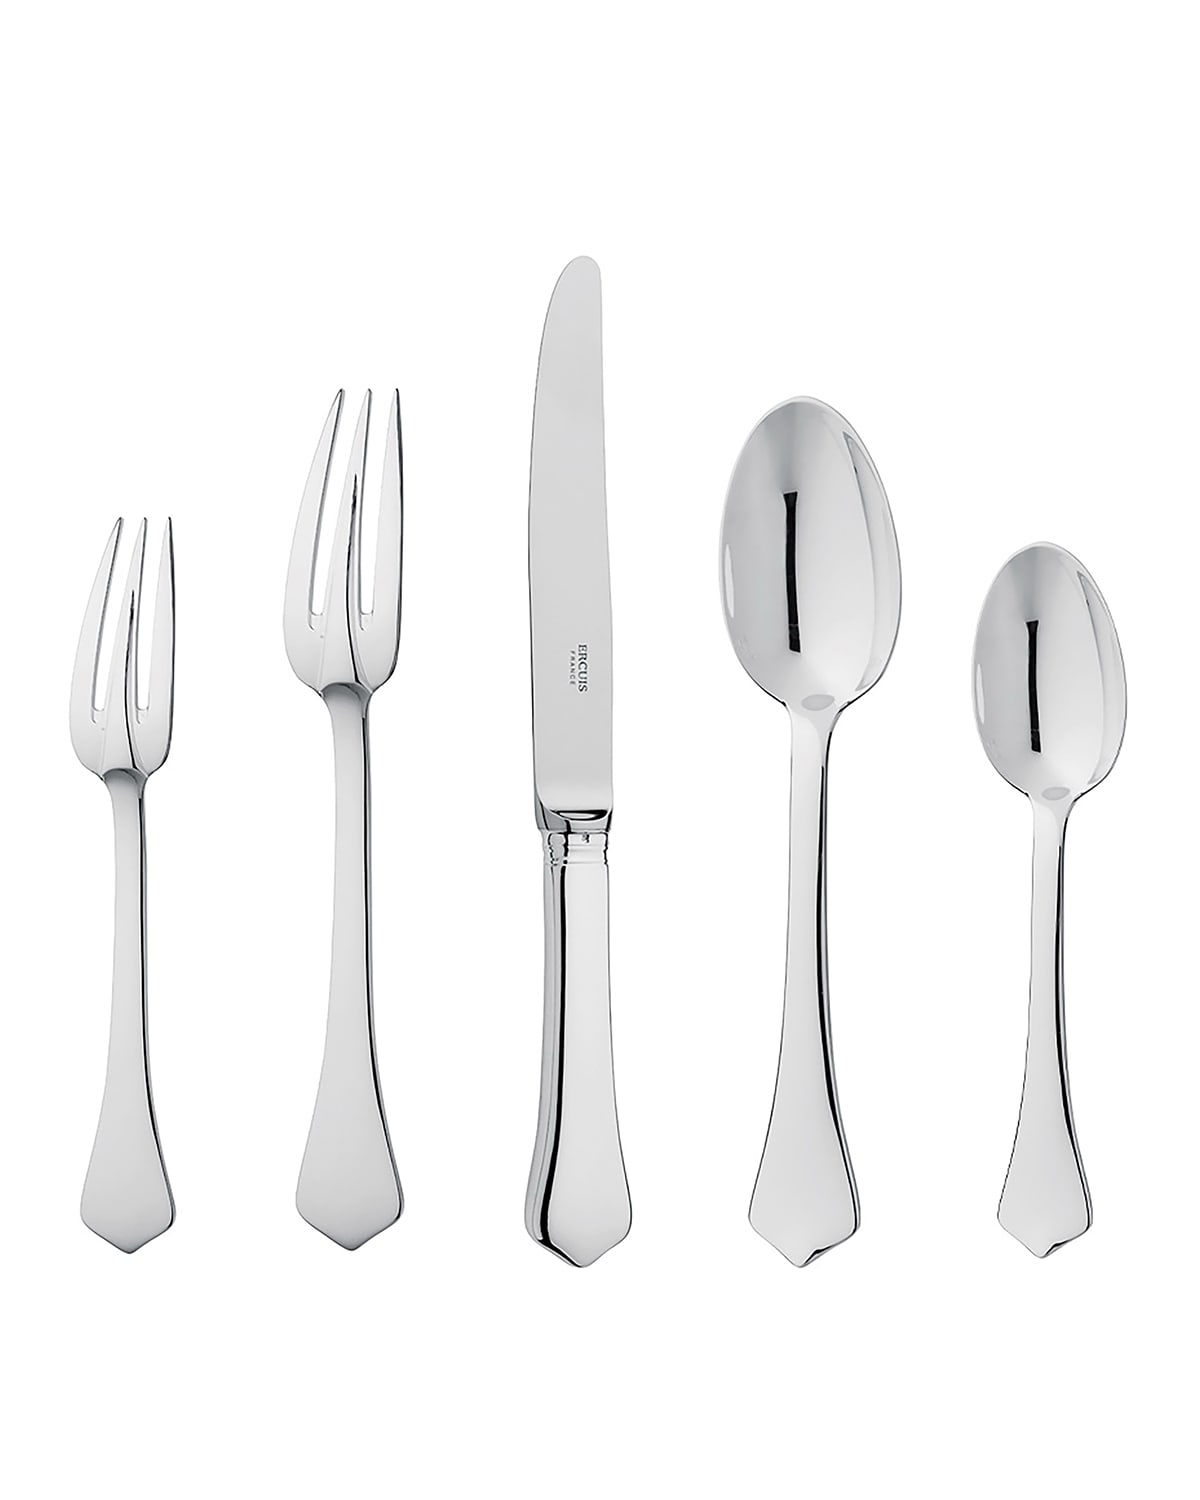 Shop Ercuis Brantome Silver Plated 5-piece Flatware Place Setting